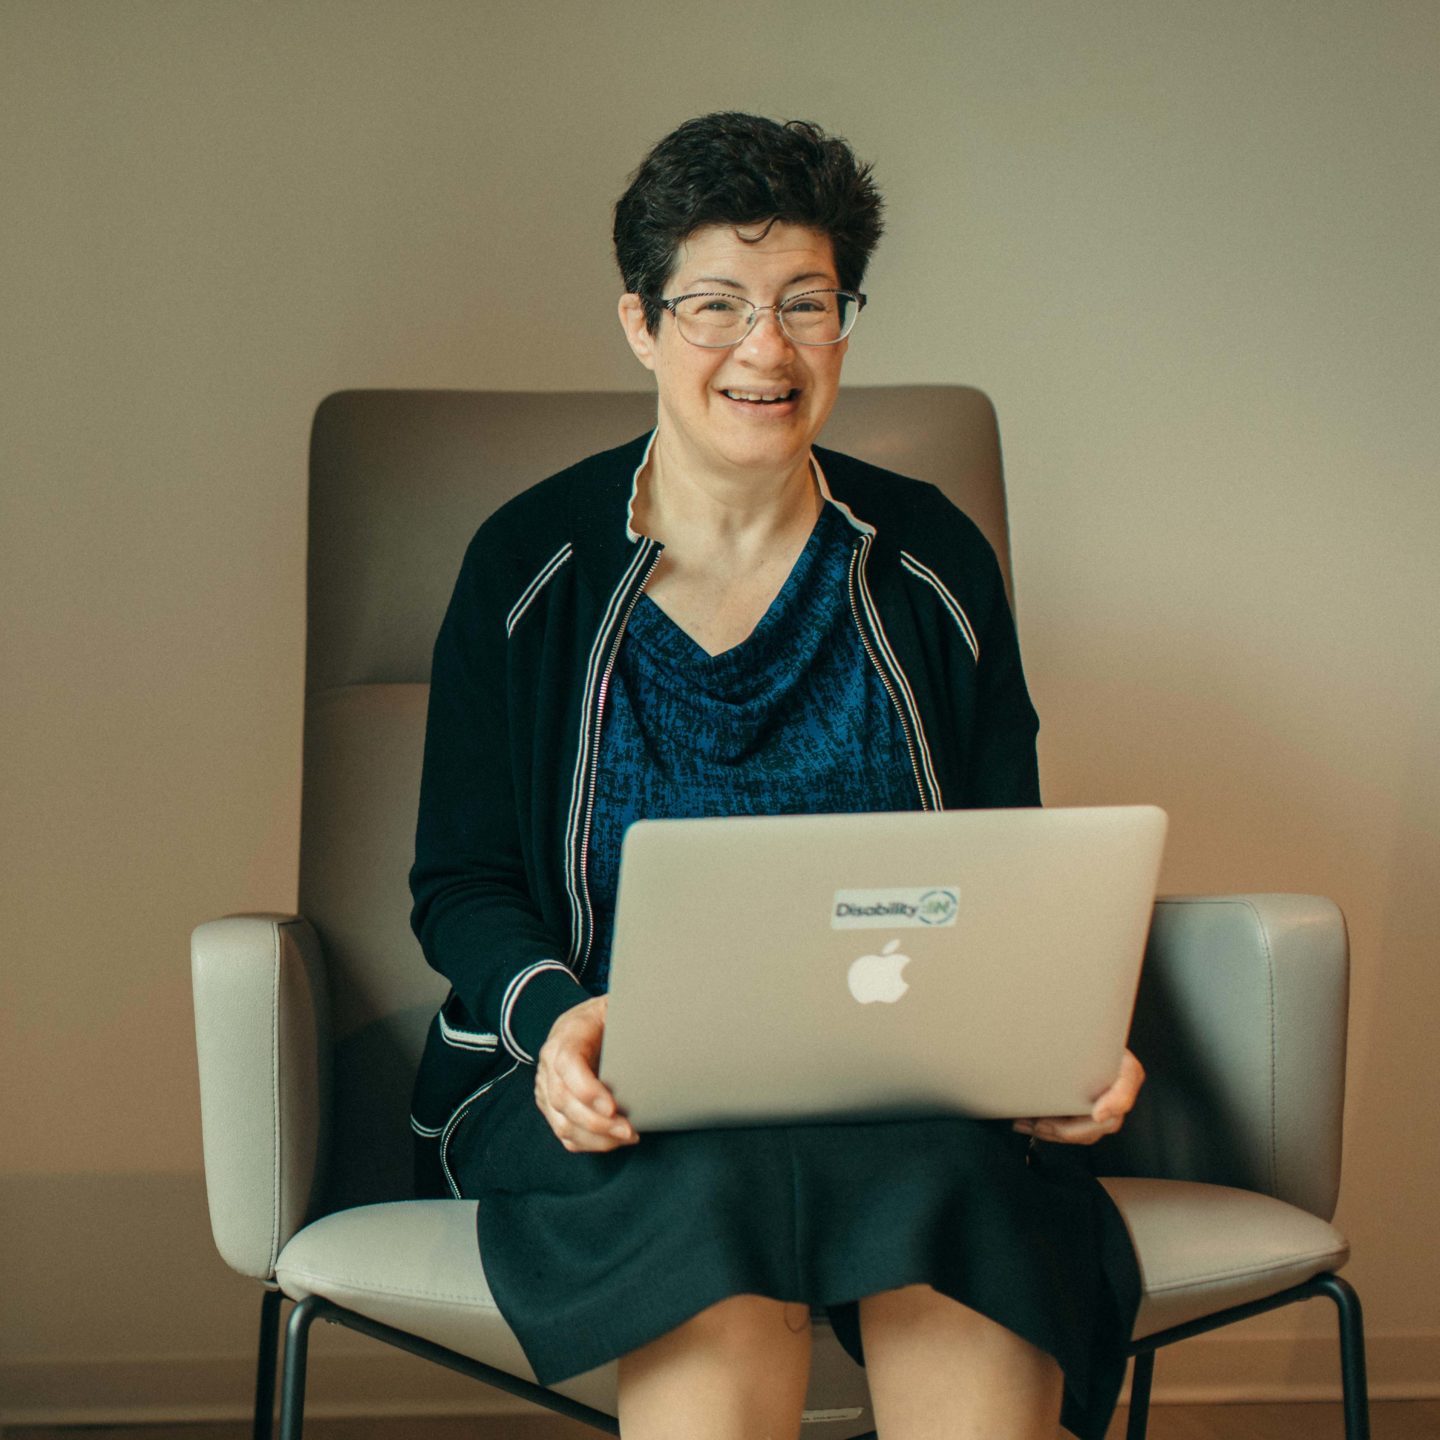 White woman with disability with short dark hair and dress with jacket while smiling and holding laptop in her lap.